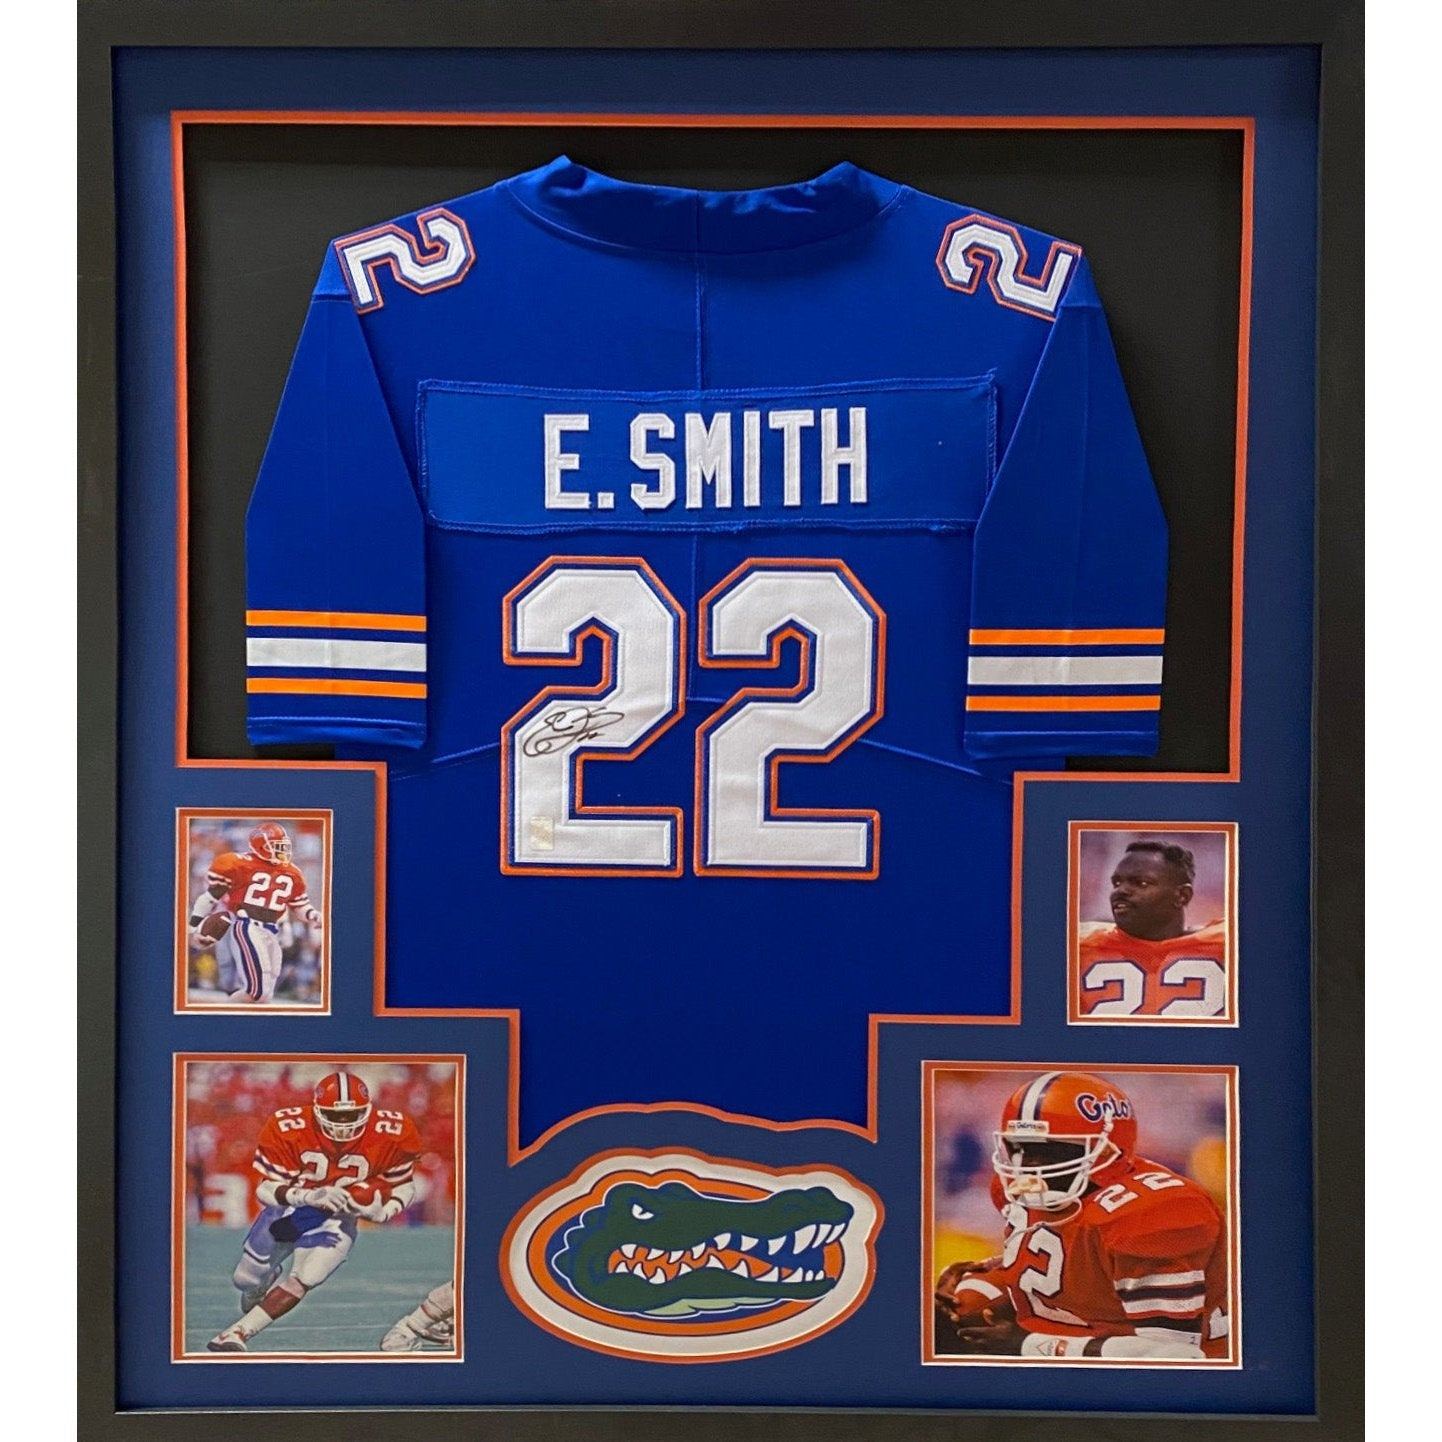 Emmitt Smith Framed Jersey Autographed Signed Florida Gators Authentic